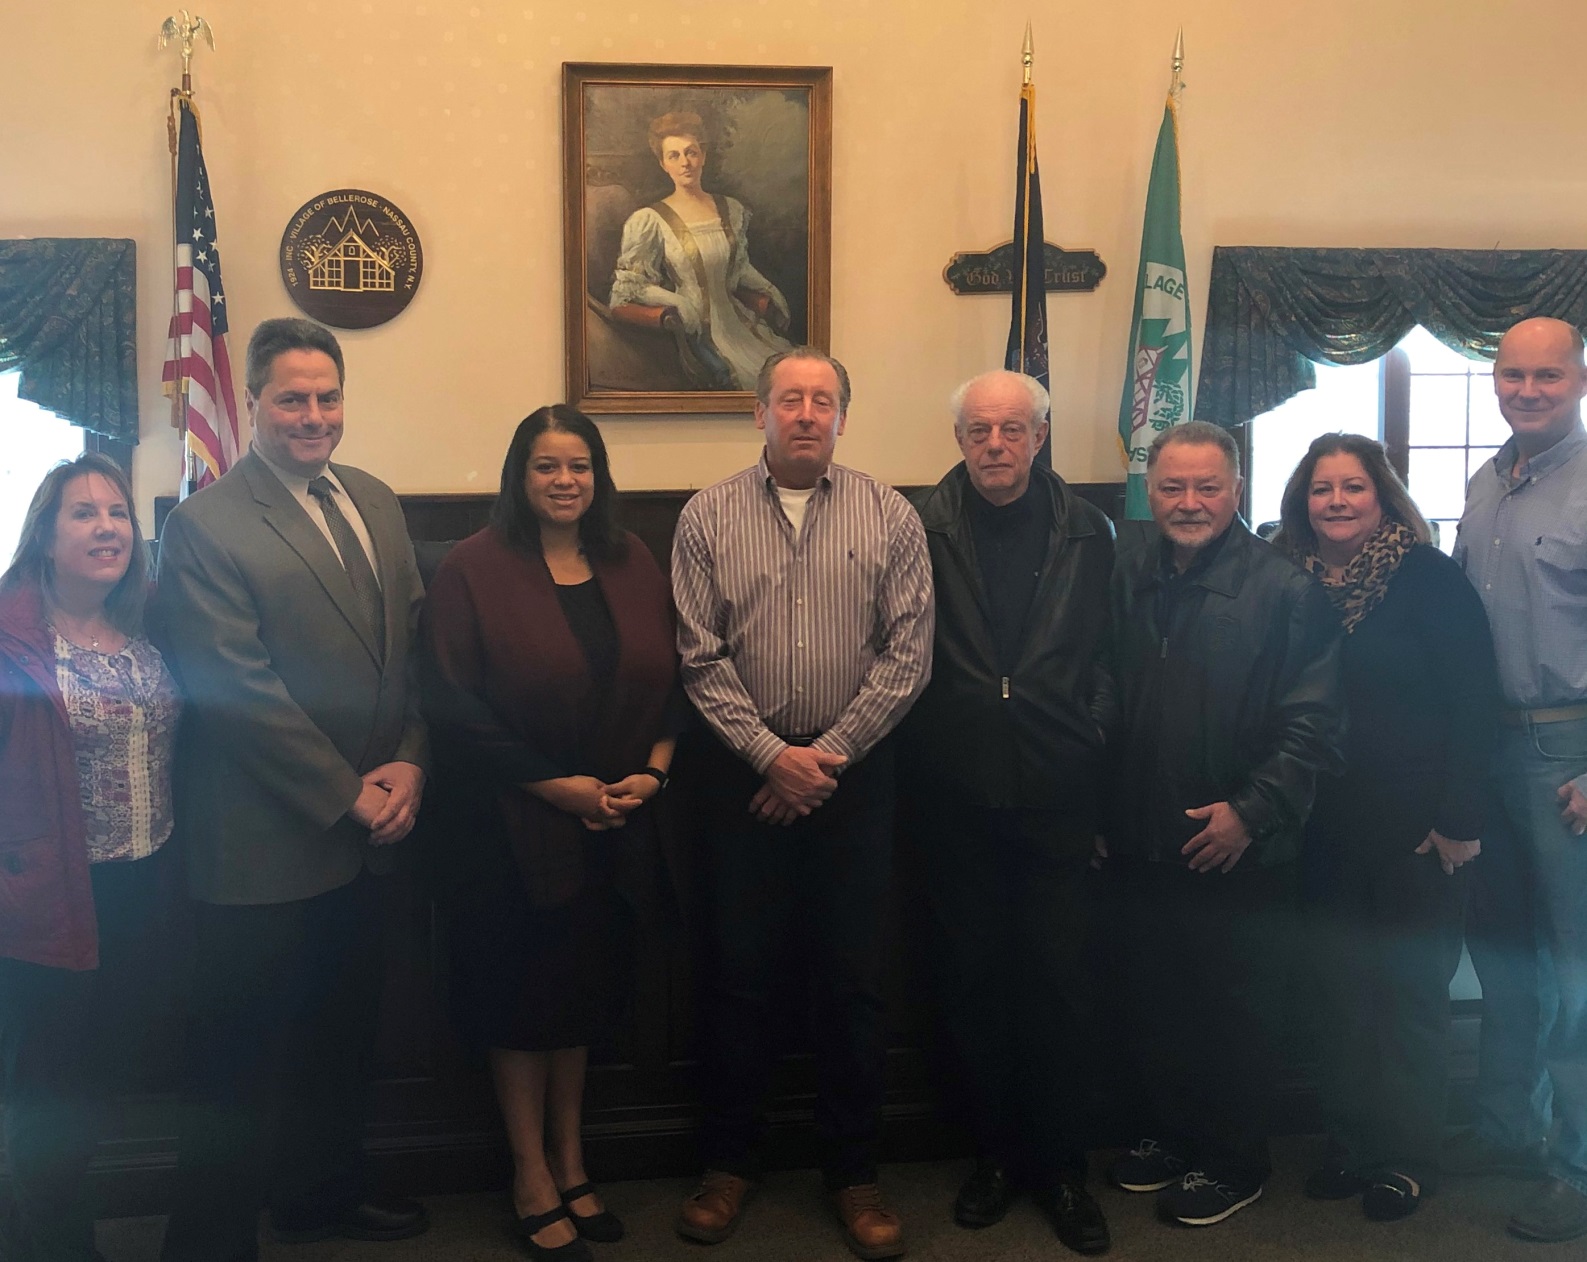 The Board of Trustees greet and thank Assemblywoman Michaelle Solages at the Historic Bellerose Village Hall for her support of the 2019 Road Project.  (L-R: Trustee Kate Dorry, Deputy Mayor Joe Juliano, Assemblywoman Michaelle Solages, Mayor Ken Moore, H